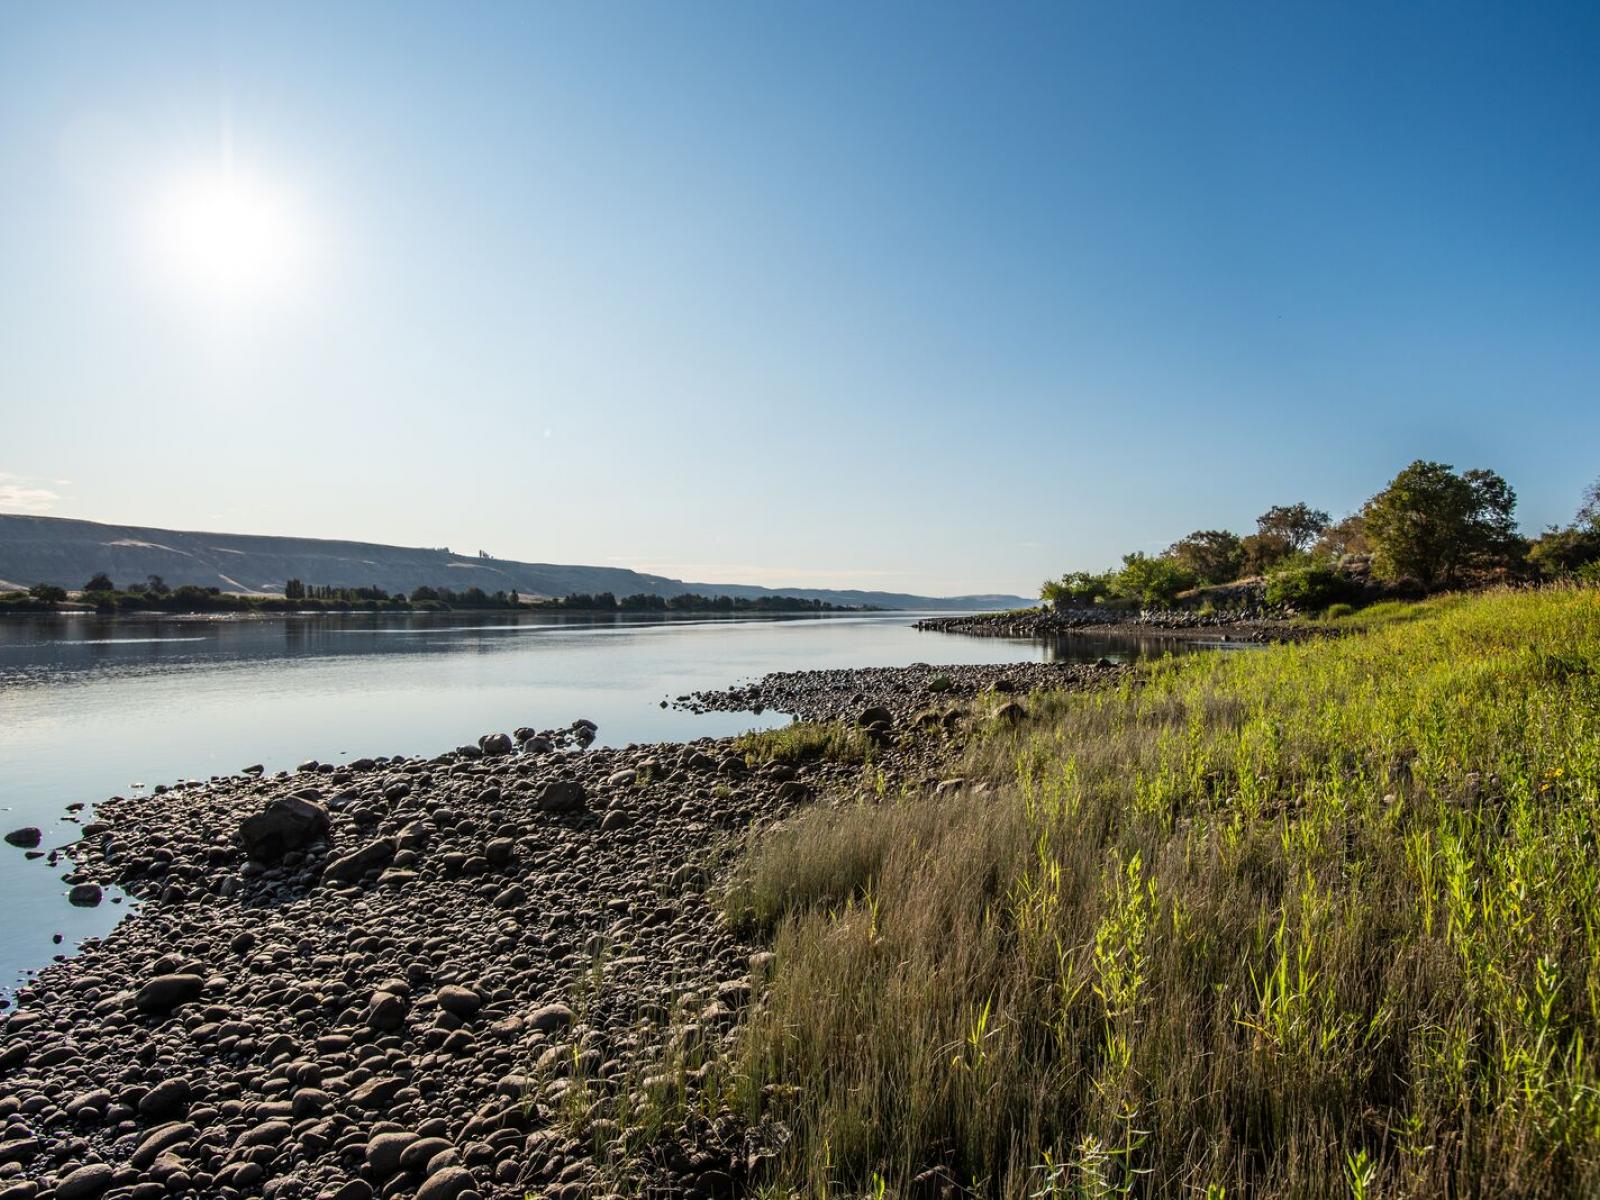 A view of the Columbia River taken in 2019 near the Hanford town site.